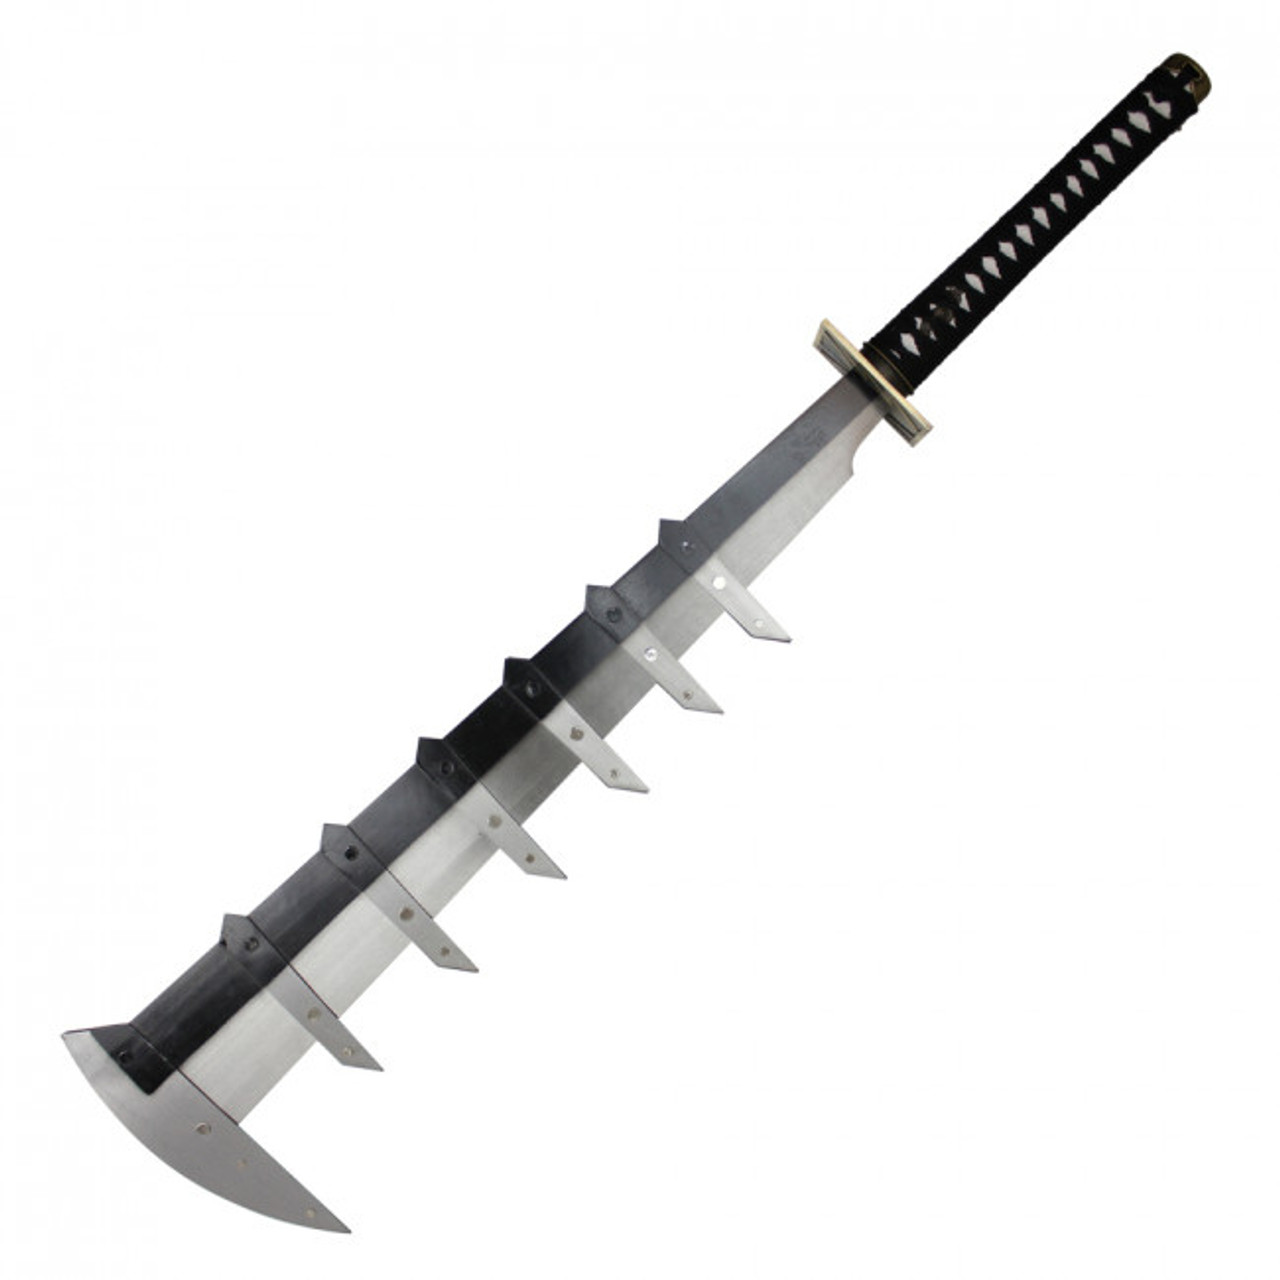 40 1/4" Silver Sword w/ Black Wrapped Handled